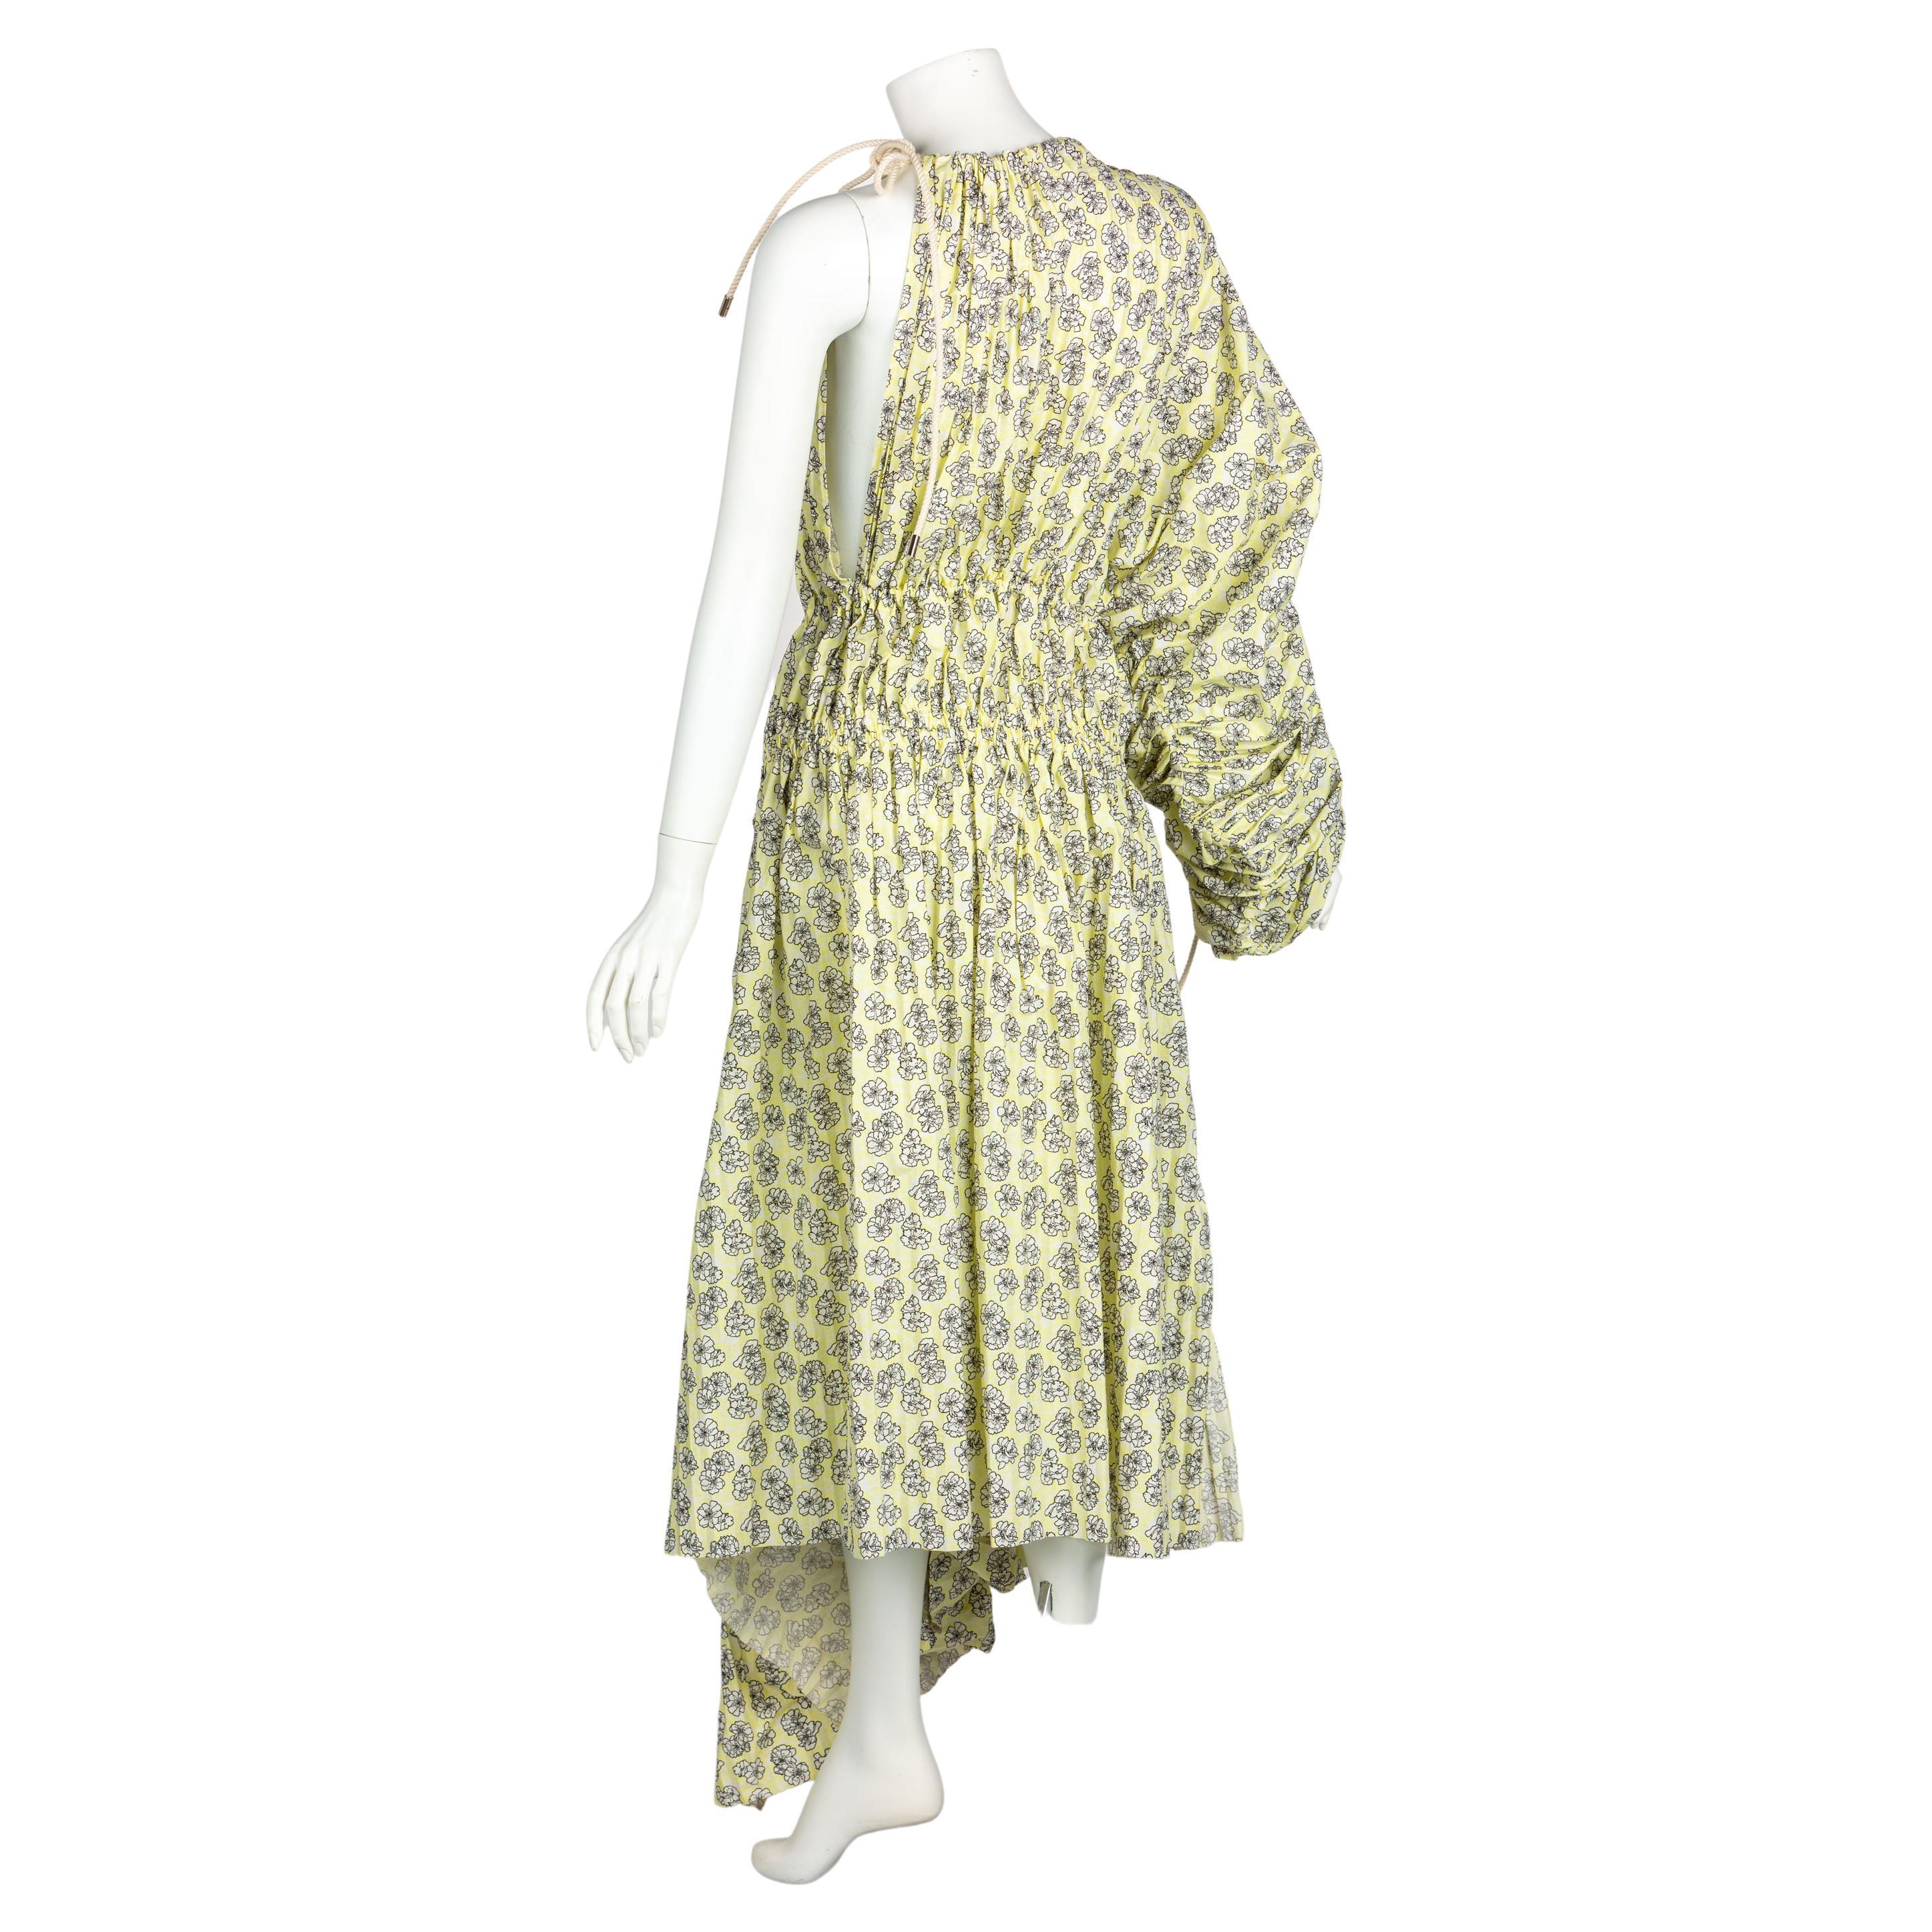 Marni Yellow Floral Cotton Ruched Dress Spring 2017 New W Tags In New Condition For Sale In Boca Raton, FL